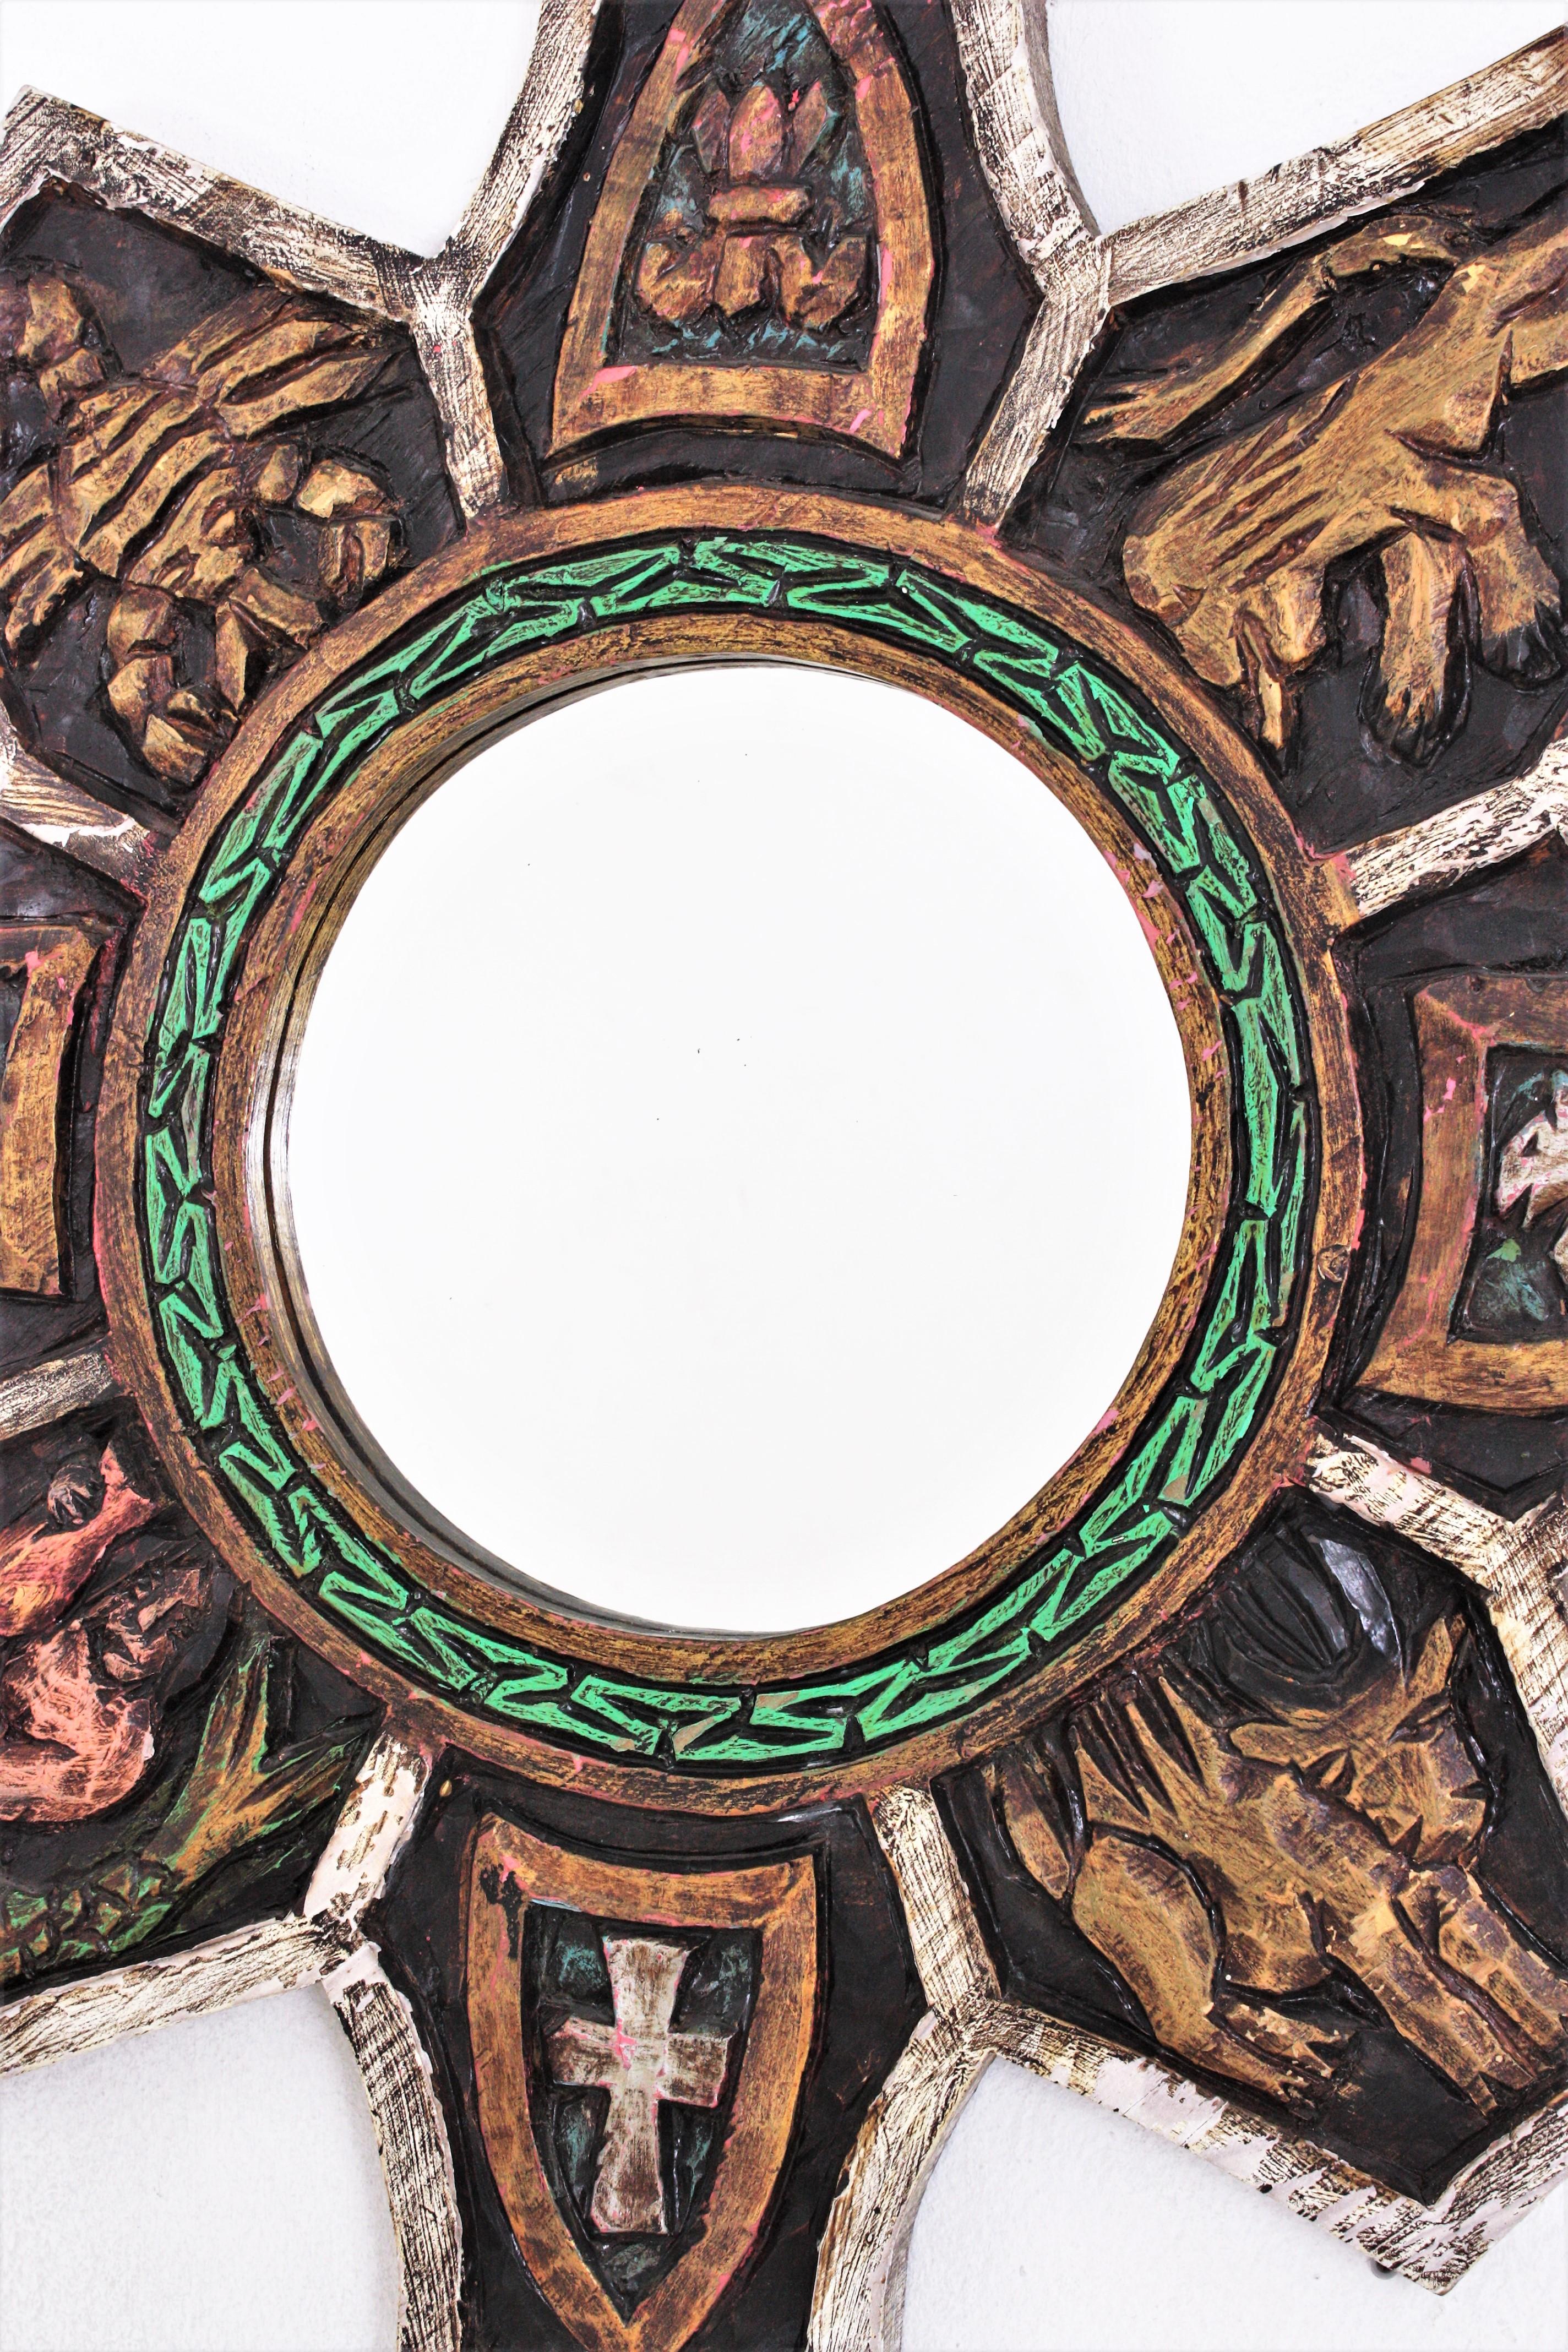 Medieval Inspired Sunburst Mirror in Polychrome Carved Wood In Good Condition For Sale In Barcelona, ES